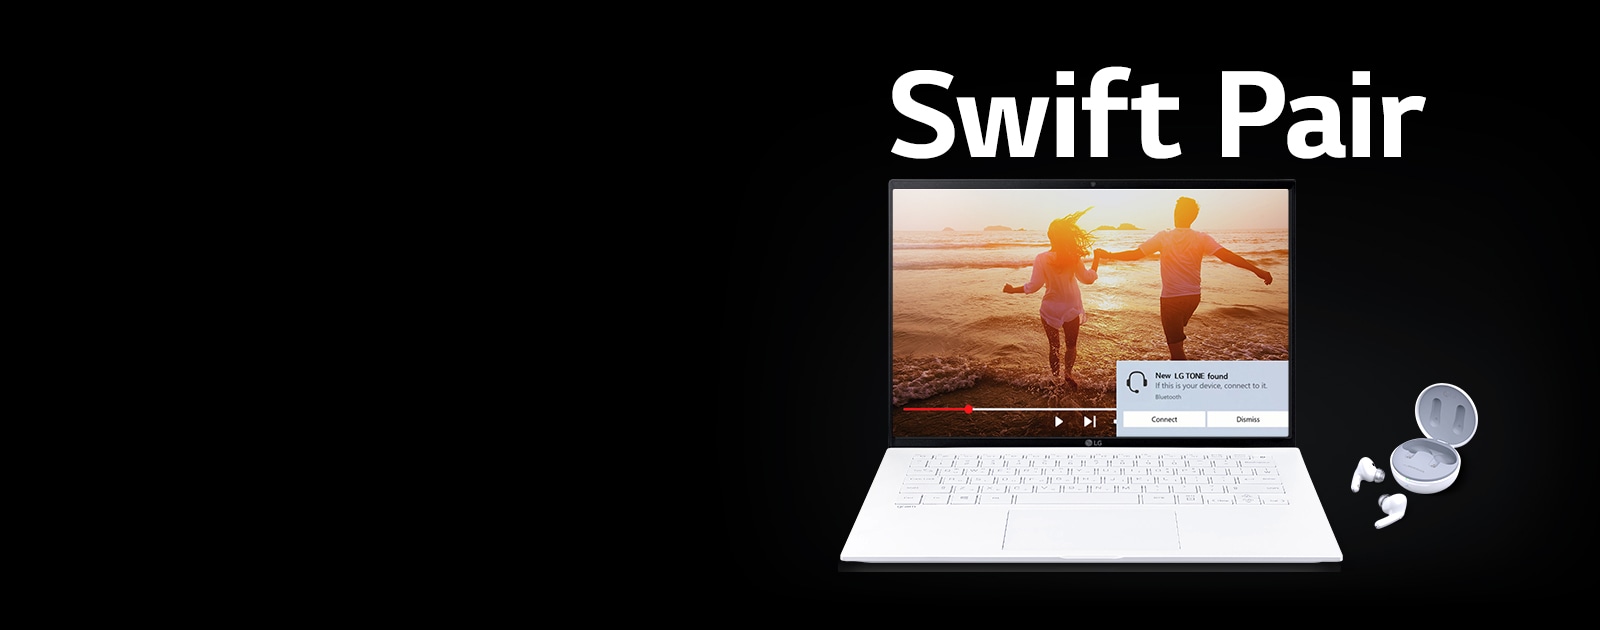 An image of a laptop and TONE Free placed under the phrase 'Swift pair', and pairing alert turned on on the open laptop screen.